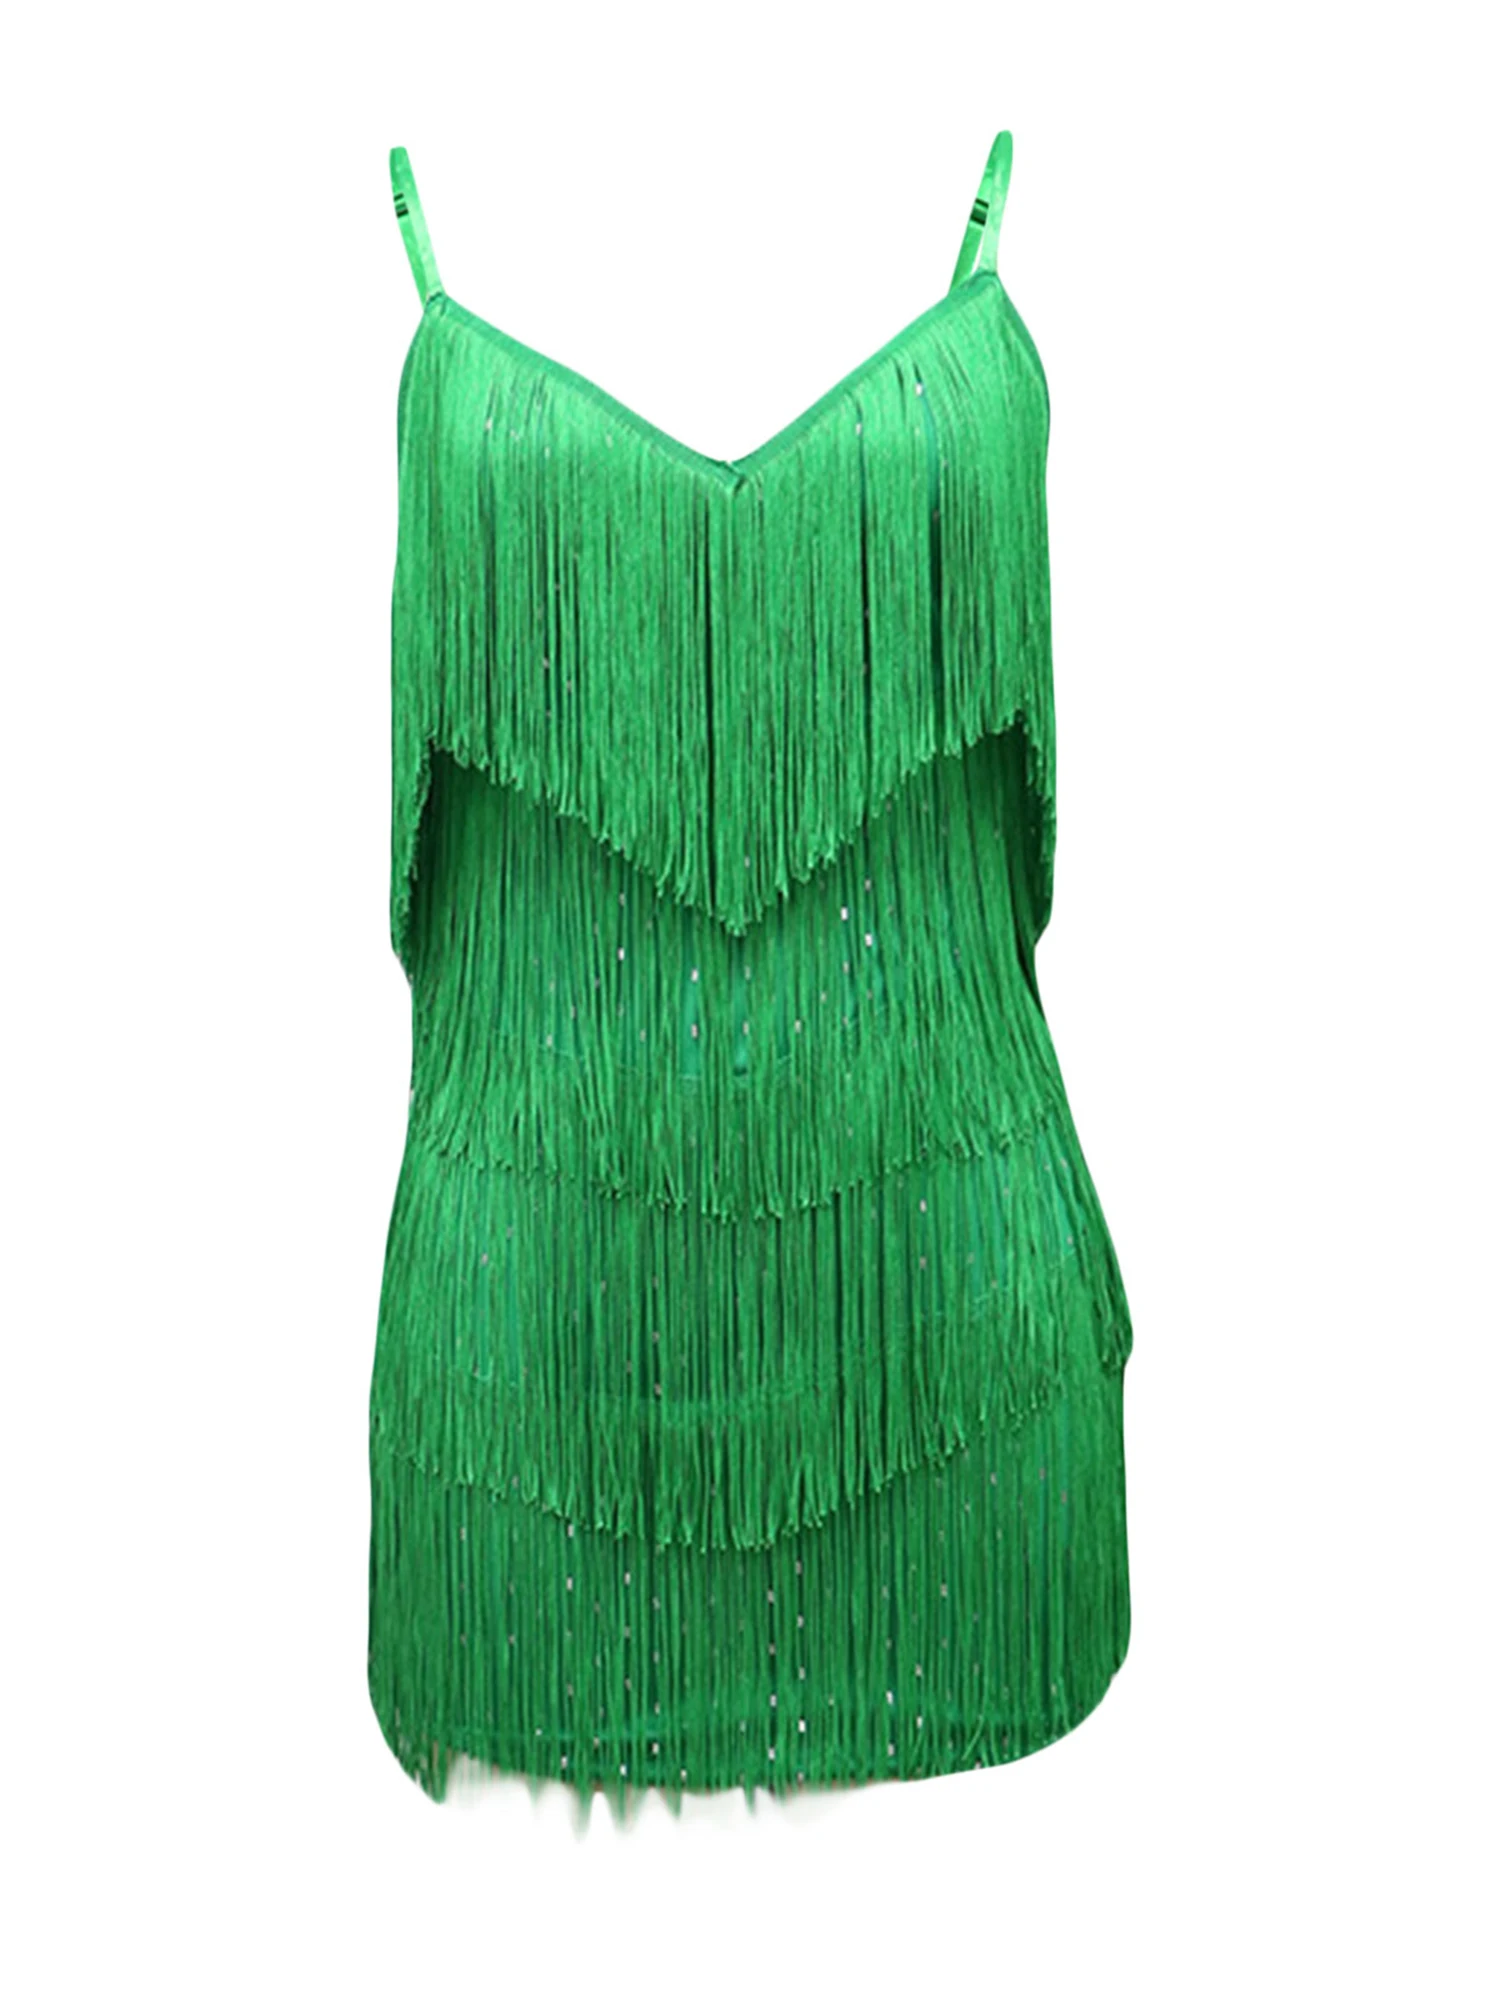 

Glamorous Backless Sequin Dress with Tassel Fringe for Women - Sparkling Spaghetti Strap Bodycon Cocktail Clubwear for Party